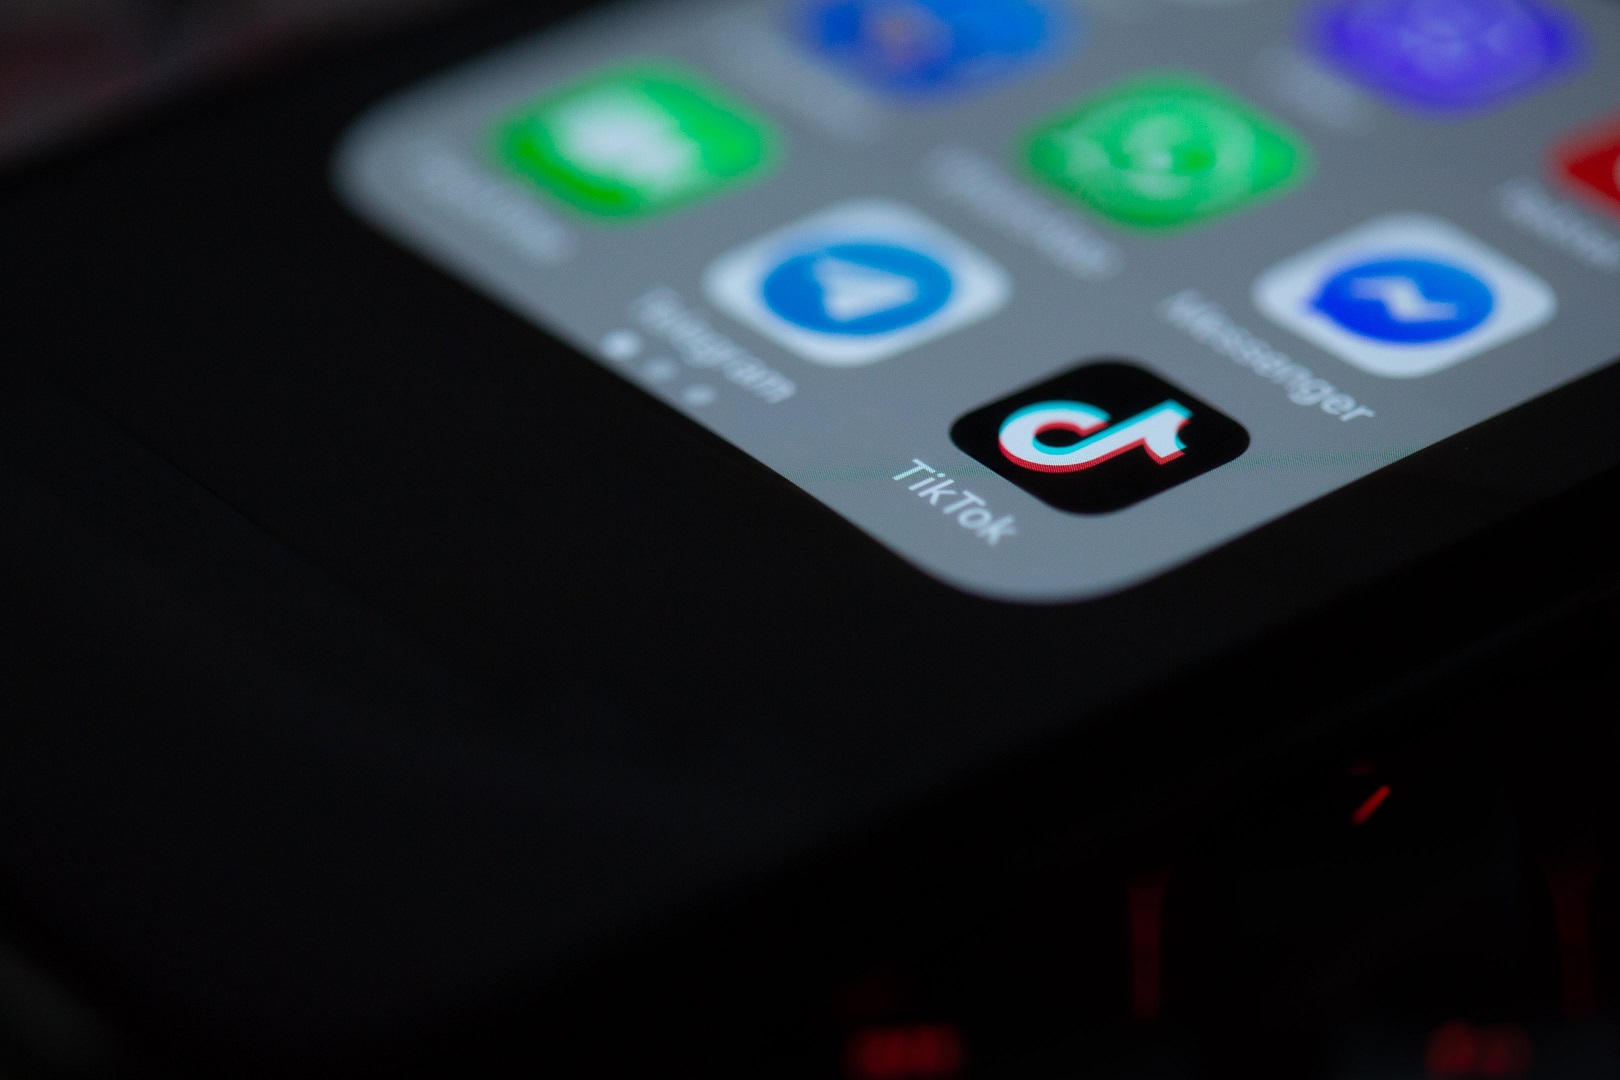 A cell phone screen against a black background. App icons appear on the screen in blur but on the bottom right of the screen, the TikTok app can visibly be seen.